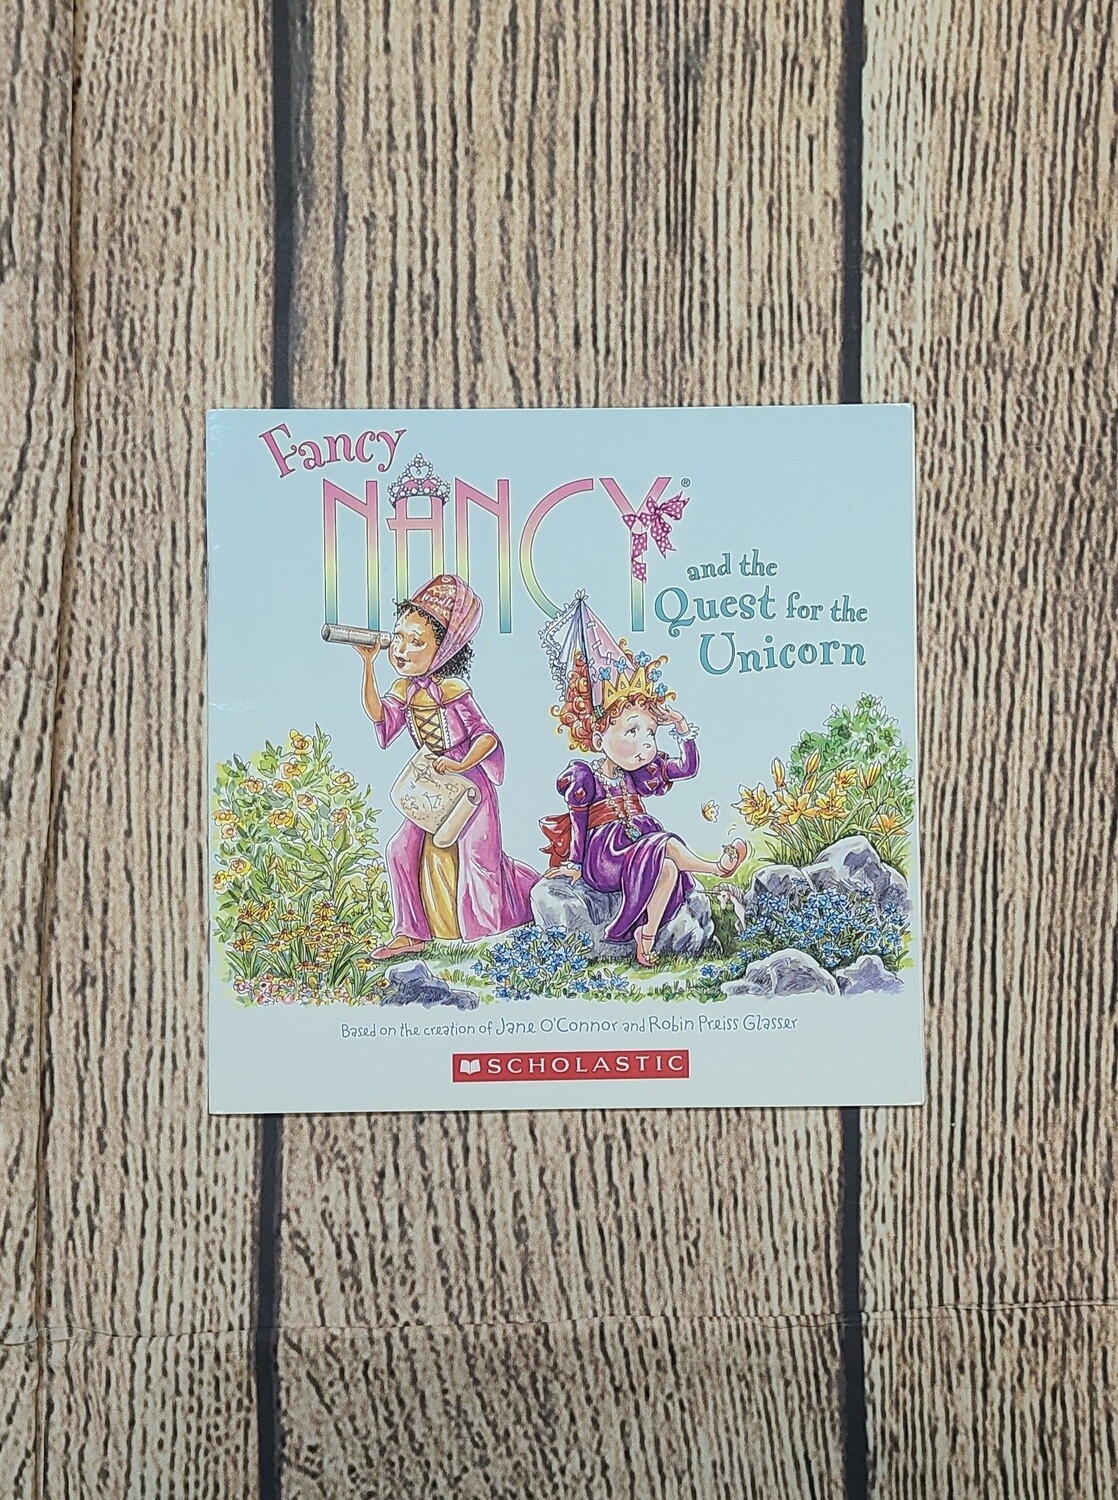 Fancy Nancy and the Quest for the Unicorn by Jane O'Connor and Robin Preiss Glasser